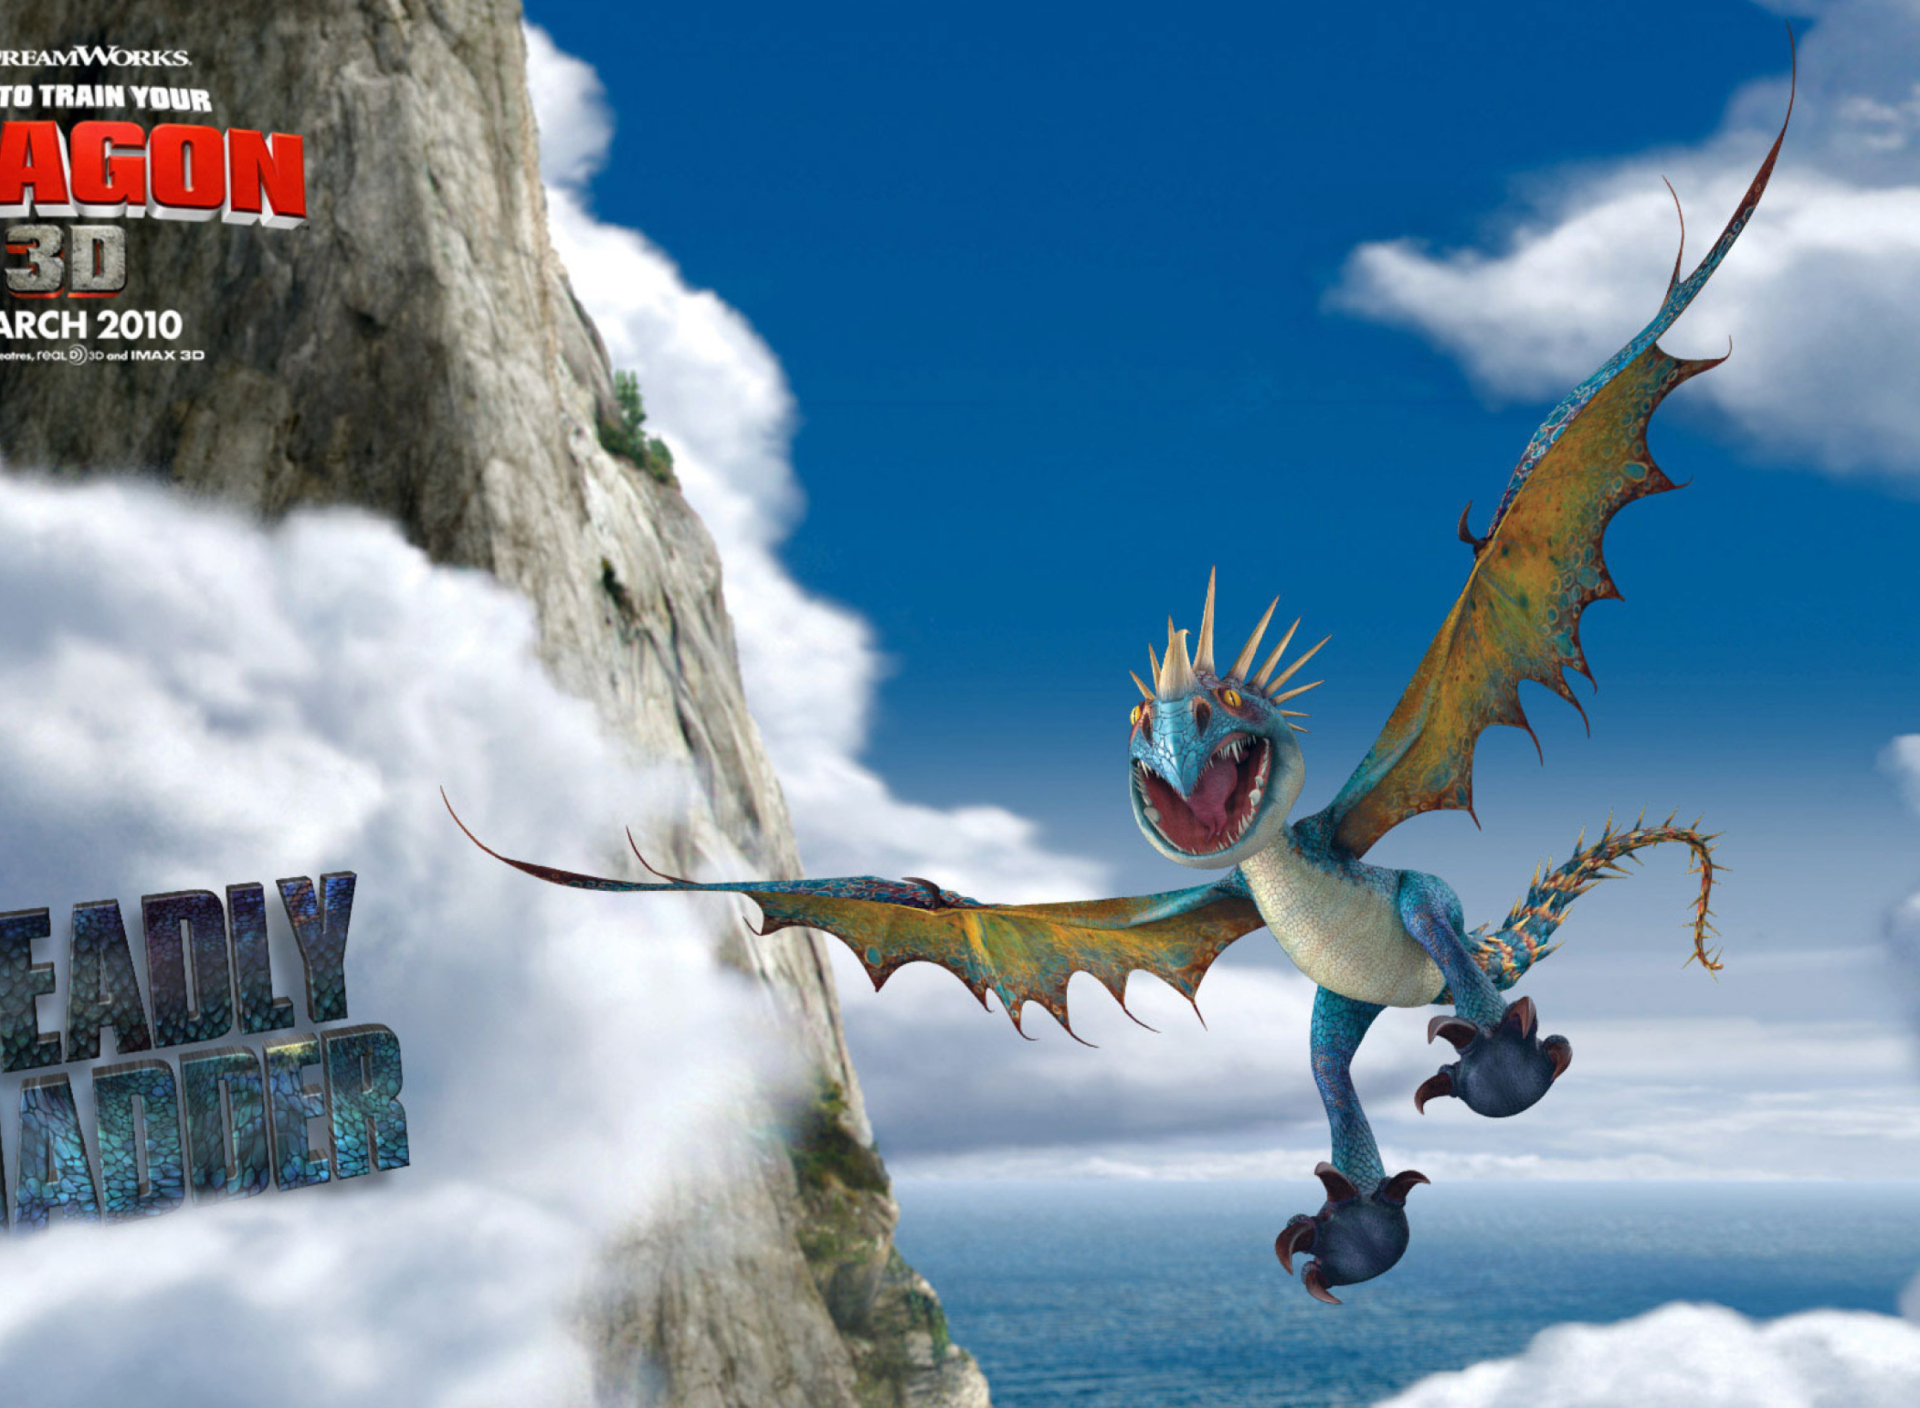 How to Train Your Dragon wallpaper 1920x1408